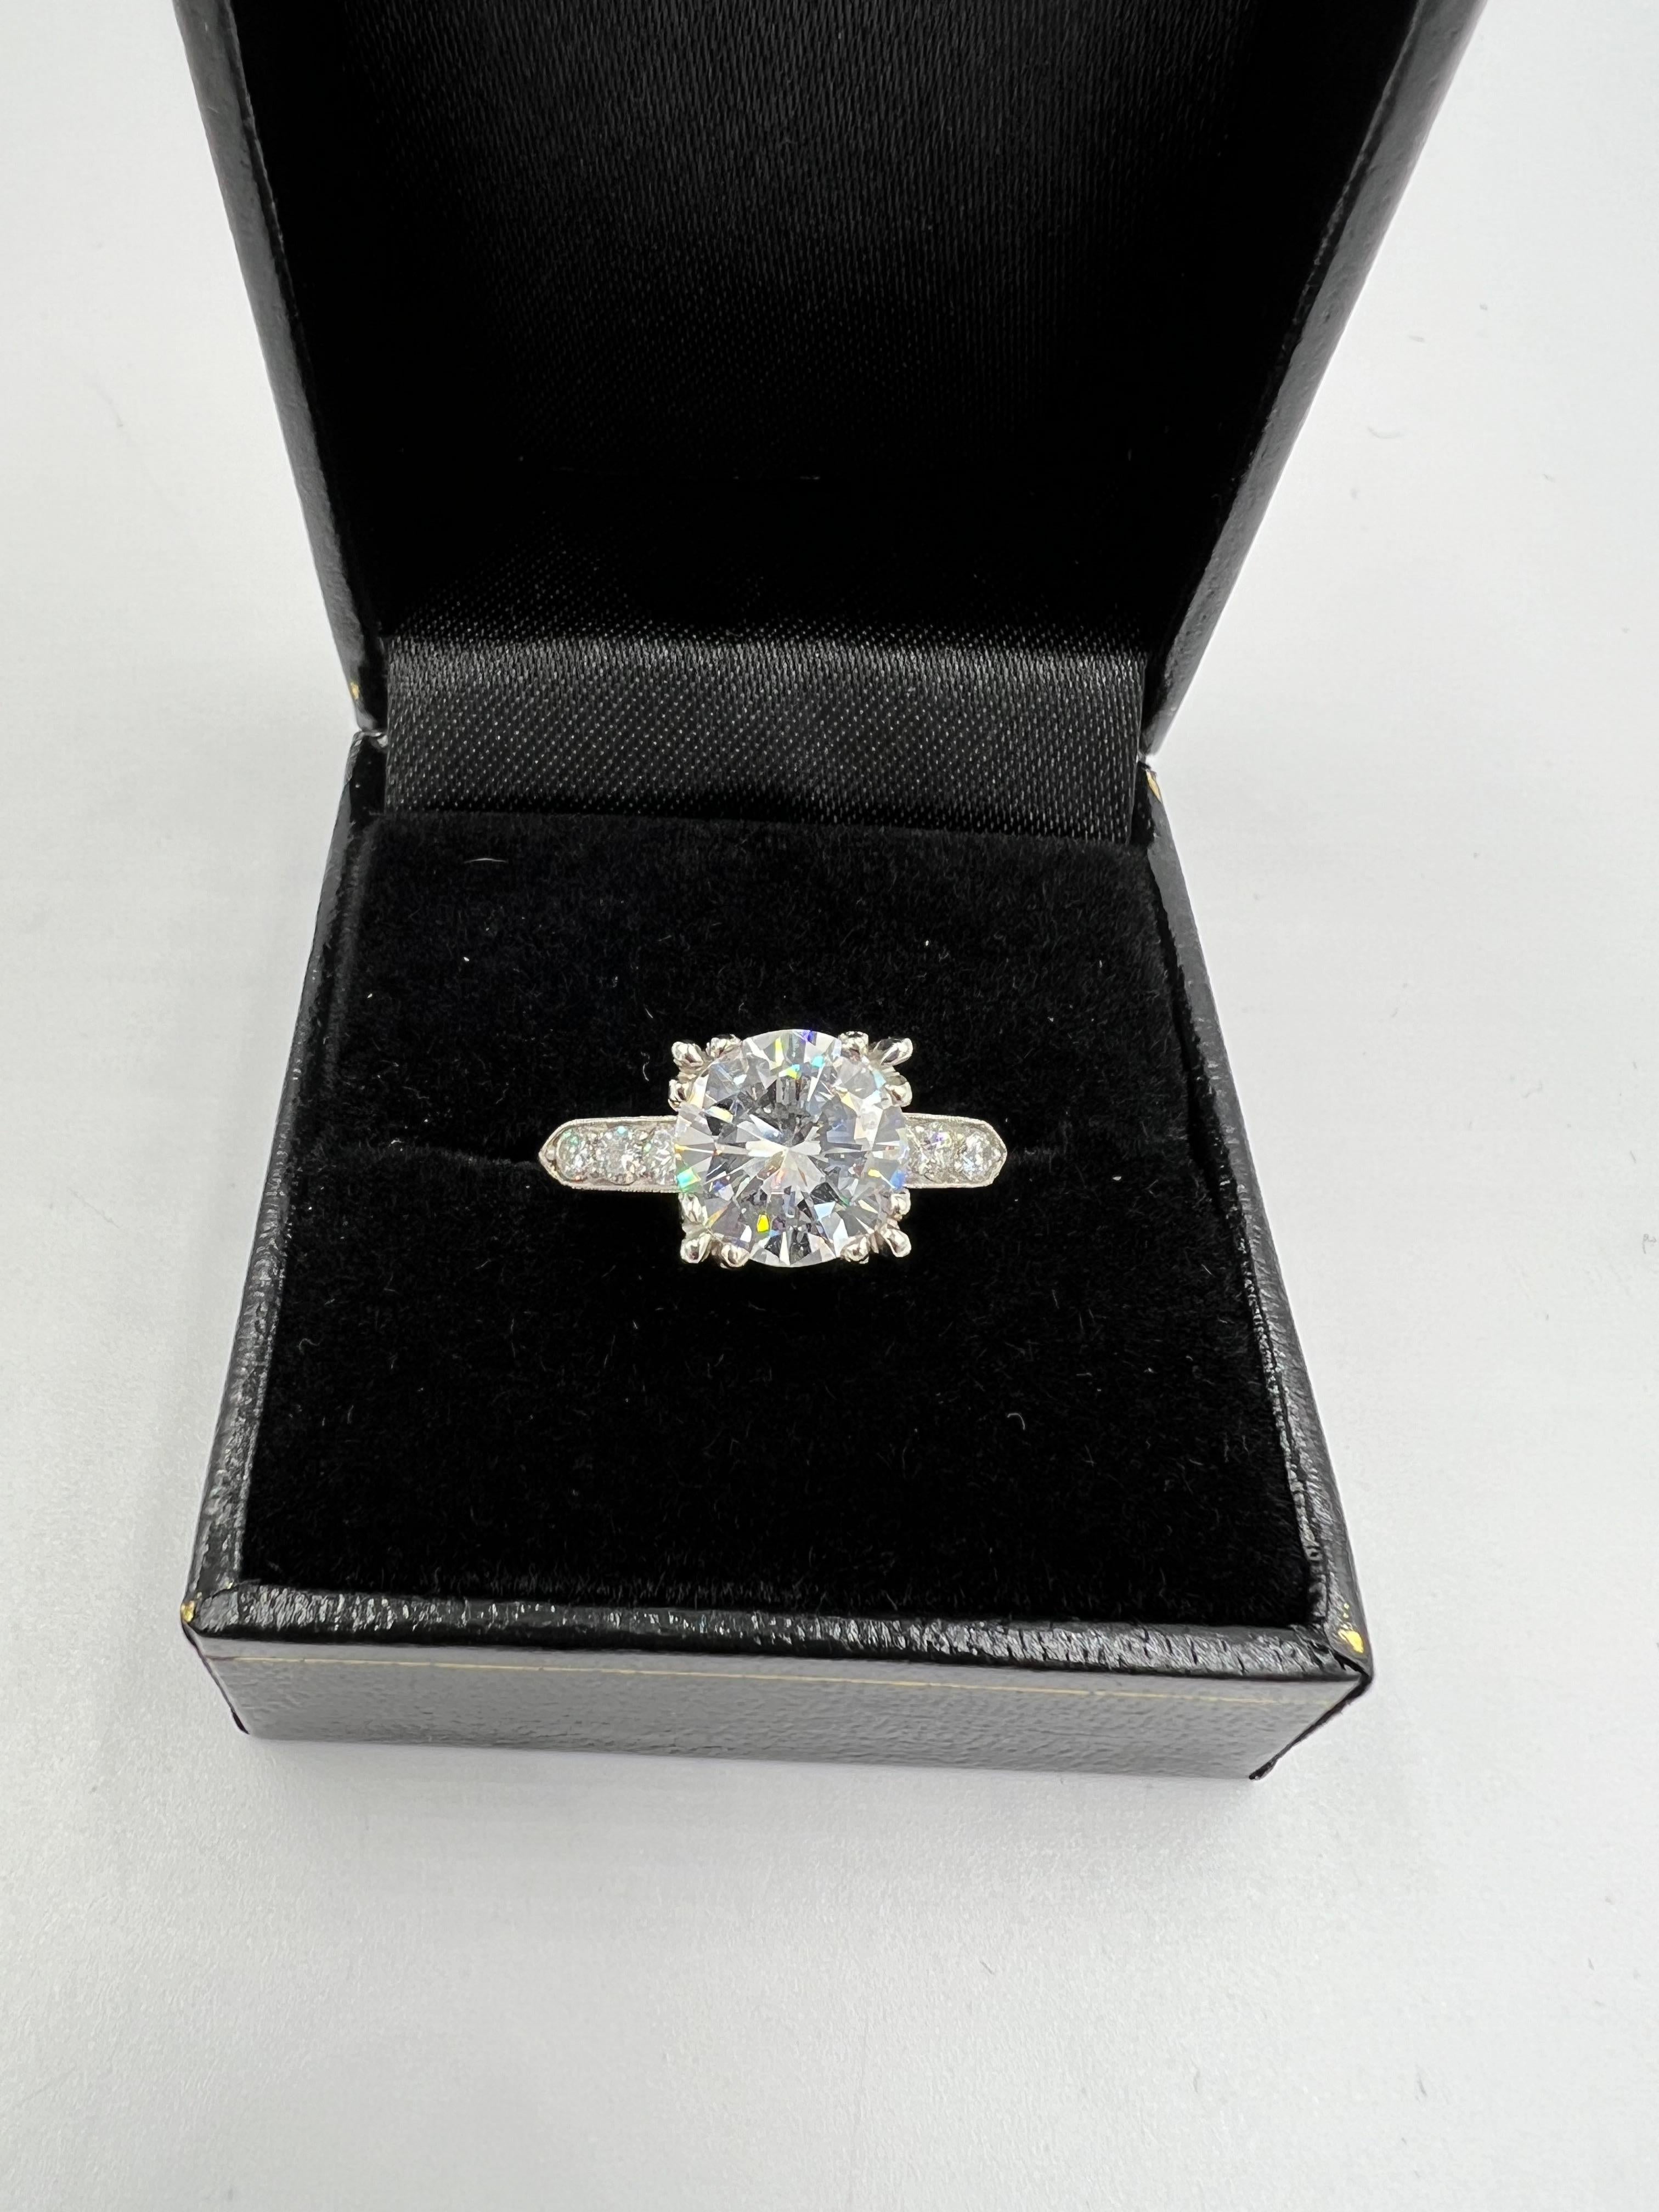 Vintage GIA 2.42 carat diamond platinum engagement ring, circa 1950s.

The Vintage GIA 2.42 Carat Diamond Platinum Engagement Ring is a timeless piece of jewelry that exudes elegance and sophistication. Crafted with precision and care, this stunning